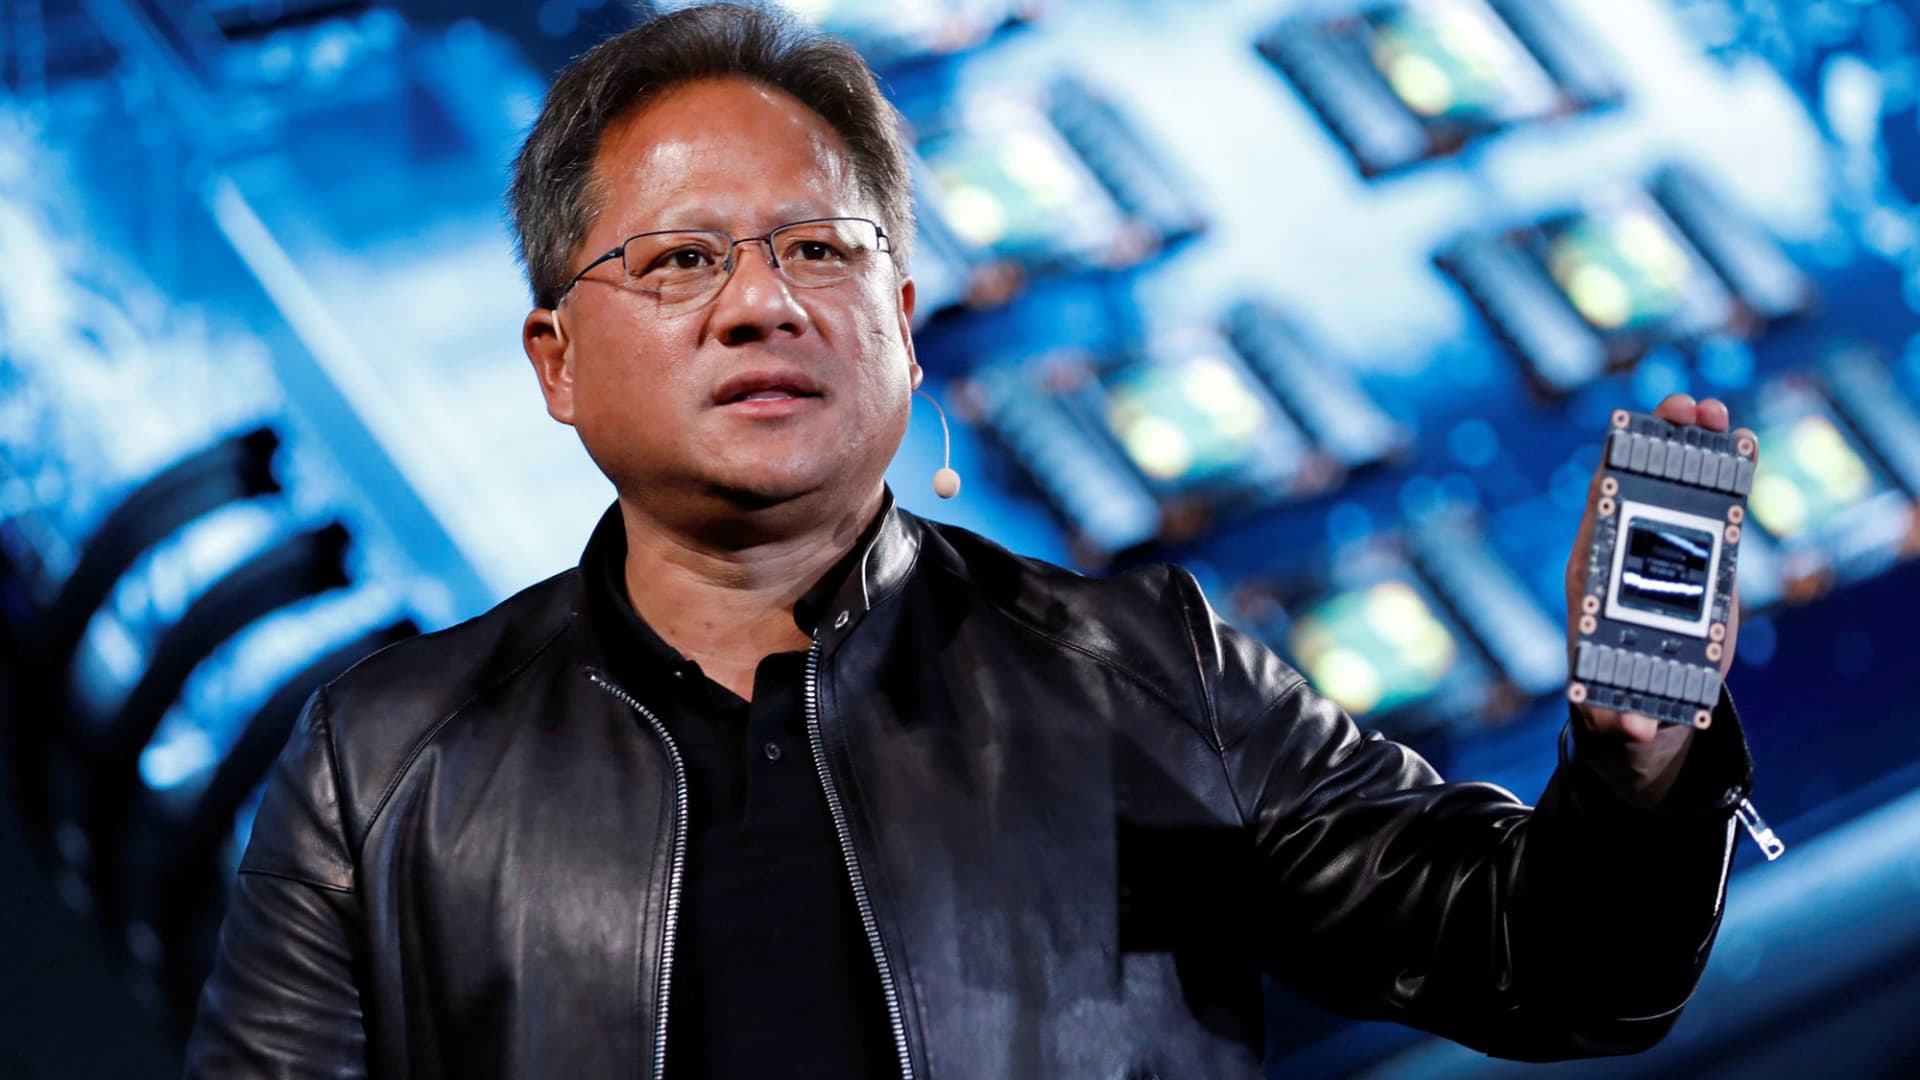 Nvidia shares spike 26% on huge forecast beat driven by A.I. chip demand